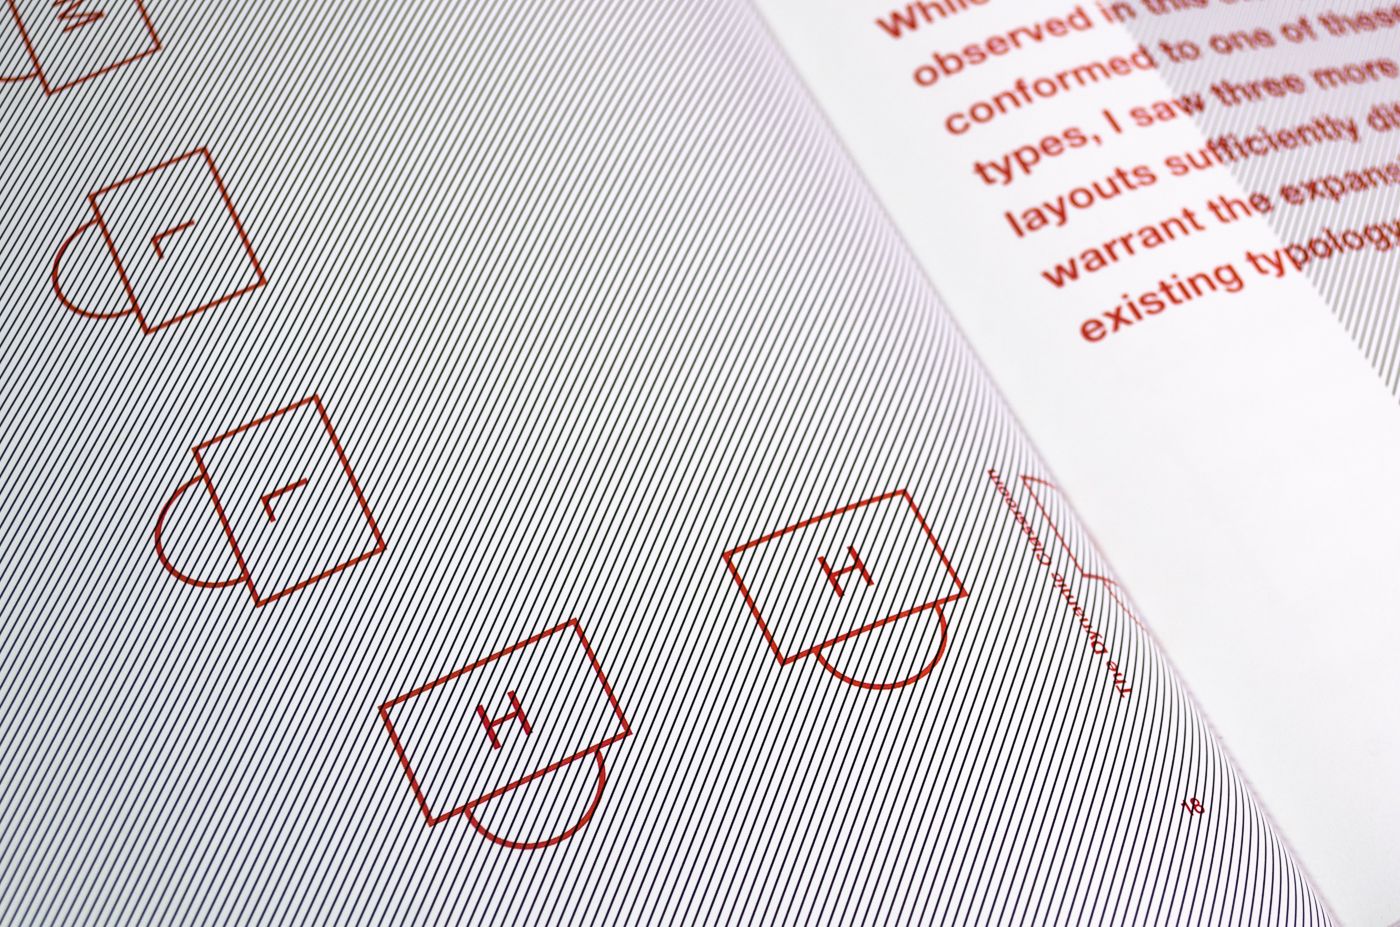 Detail of spread from The Dynamic Classroom. Thin black diagonal lines cover the page on the left. A diagram of classroom chairs is overprinted in red ink. The page on the right, which is out of focus, has text printed in red.